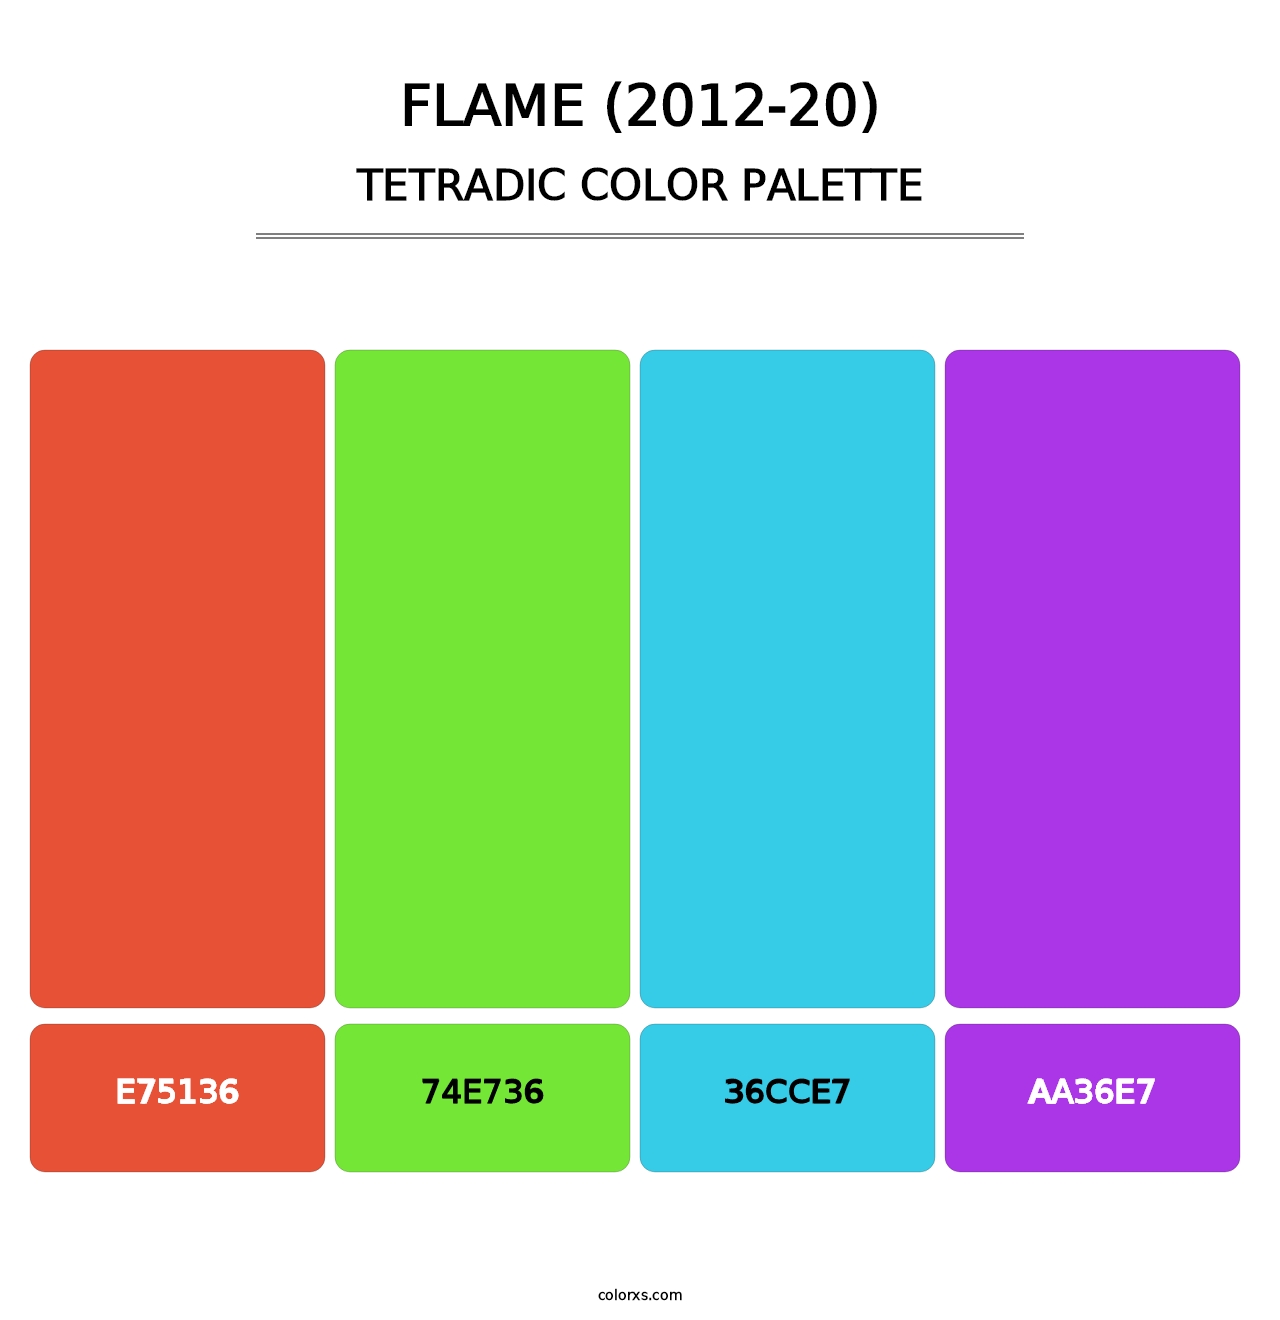 Flame (2012-20) - Tetradic Color Palette